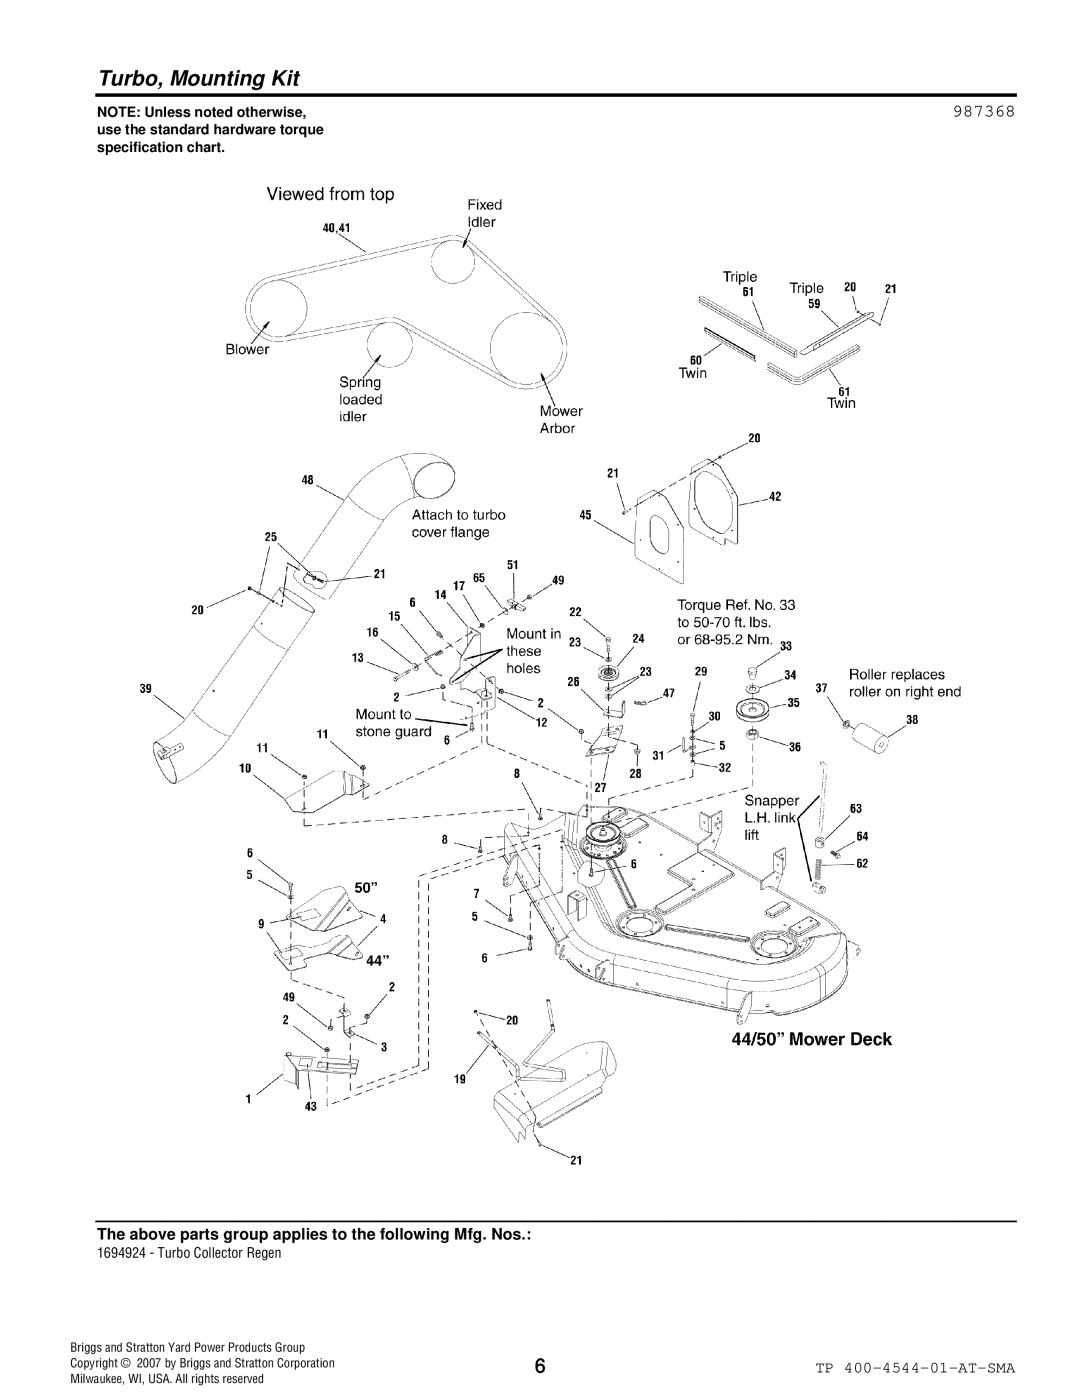 Snapper 4544 manual Turbo, Mounting Kit, 987368, NOTE Unless noted otherwise, Briggs and Stratton Yard Power Products Group 